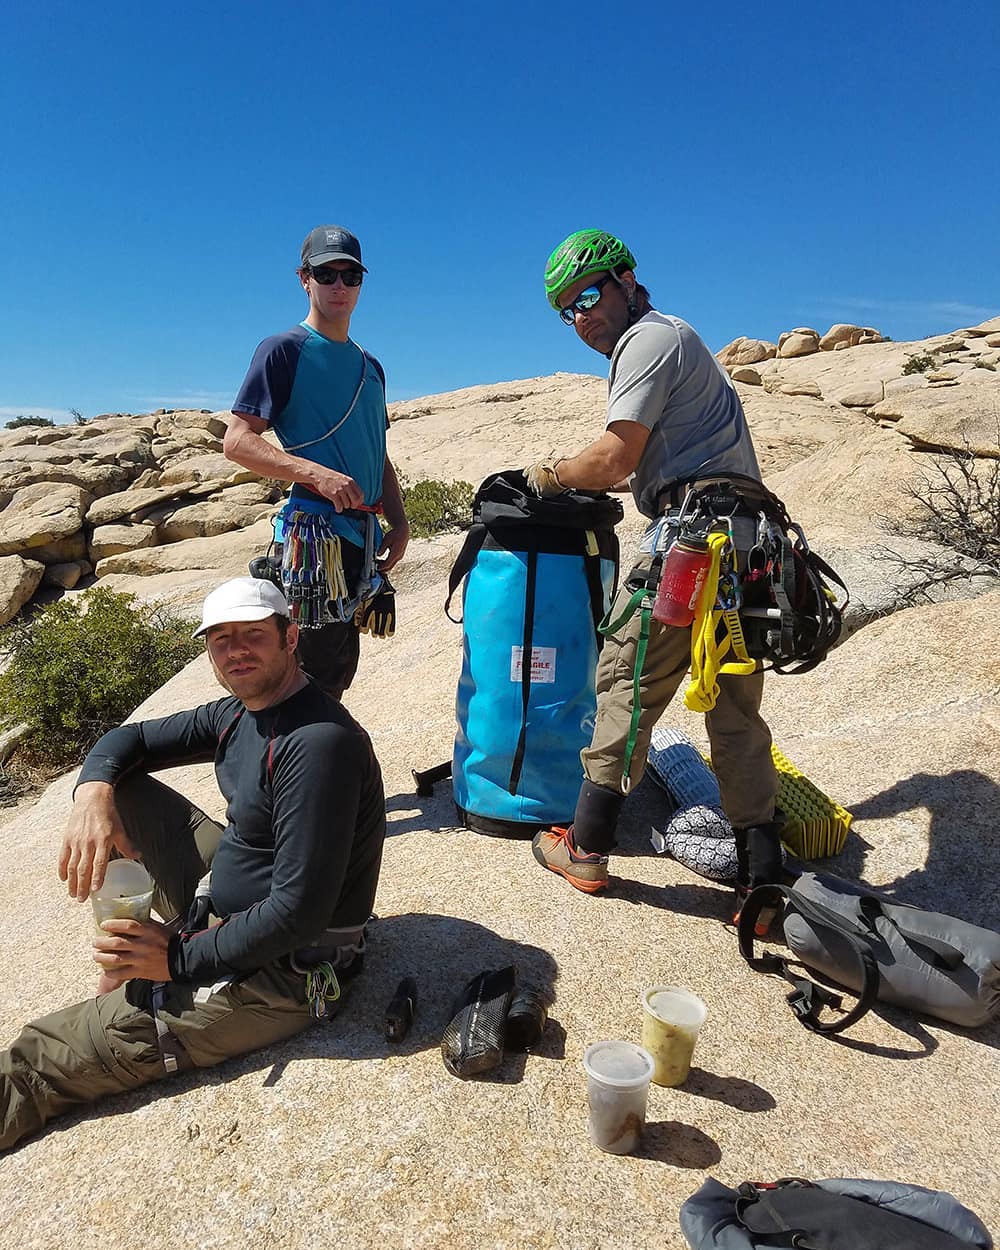 Solid Crew back in Mexico... trying to send the PanAm and make a climbing movie with @shepherdimagesllc @kovacsan11 and @cannonjtc We had a great time on the 10 pitch classic route up (the quite) impressive "El Gran Trono Blanco" in the sierra de Juarez. It was quite a logistical odyseey requiring hell of a support crew - especially our logis guy Andre @kovacsan11 who (literally) hauled ass to get ahead of Jordan @cannonjtc and I to geta) fixed lines out of our way and b) to be out of @shepherdimagesllc camera frame.The movie never happened or will it @shepherdimagesllc ? Regardless we had a blast and hell of good time camping out. We spend the night at the base of Gran Trono Blanco. We brought tons of great food to cook and totally forgot our cookware. Good luck that new friends such as @camdenclements were around to help. There are a few more pictures and I guess some fun footage if Jason will ever release it. Stay tuned. We will post at least more pics in our stories...#chillinorockclimbing #rockclimbing #mexico #panam #climbing_pictures_of_instagram #project #trip #strategy #crew #supportteam #adventure #proj...@kovacsan11 @shepherdimagesllc @instacam007 @cannonjtc